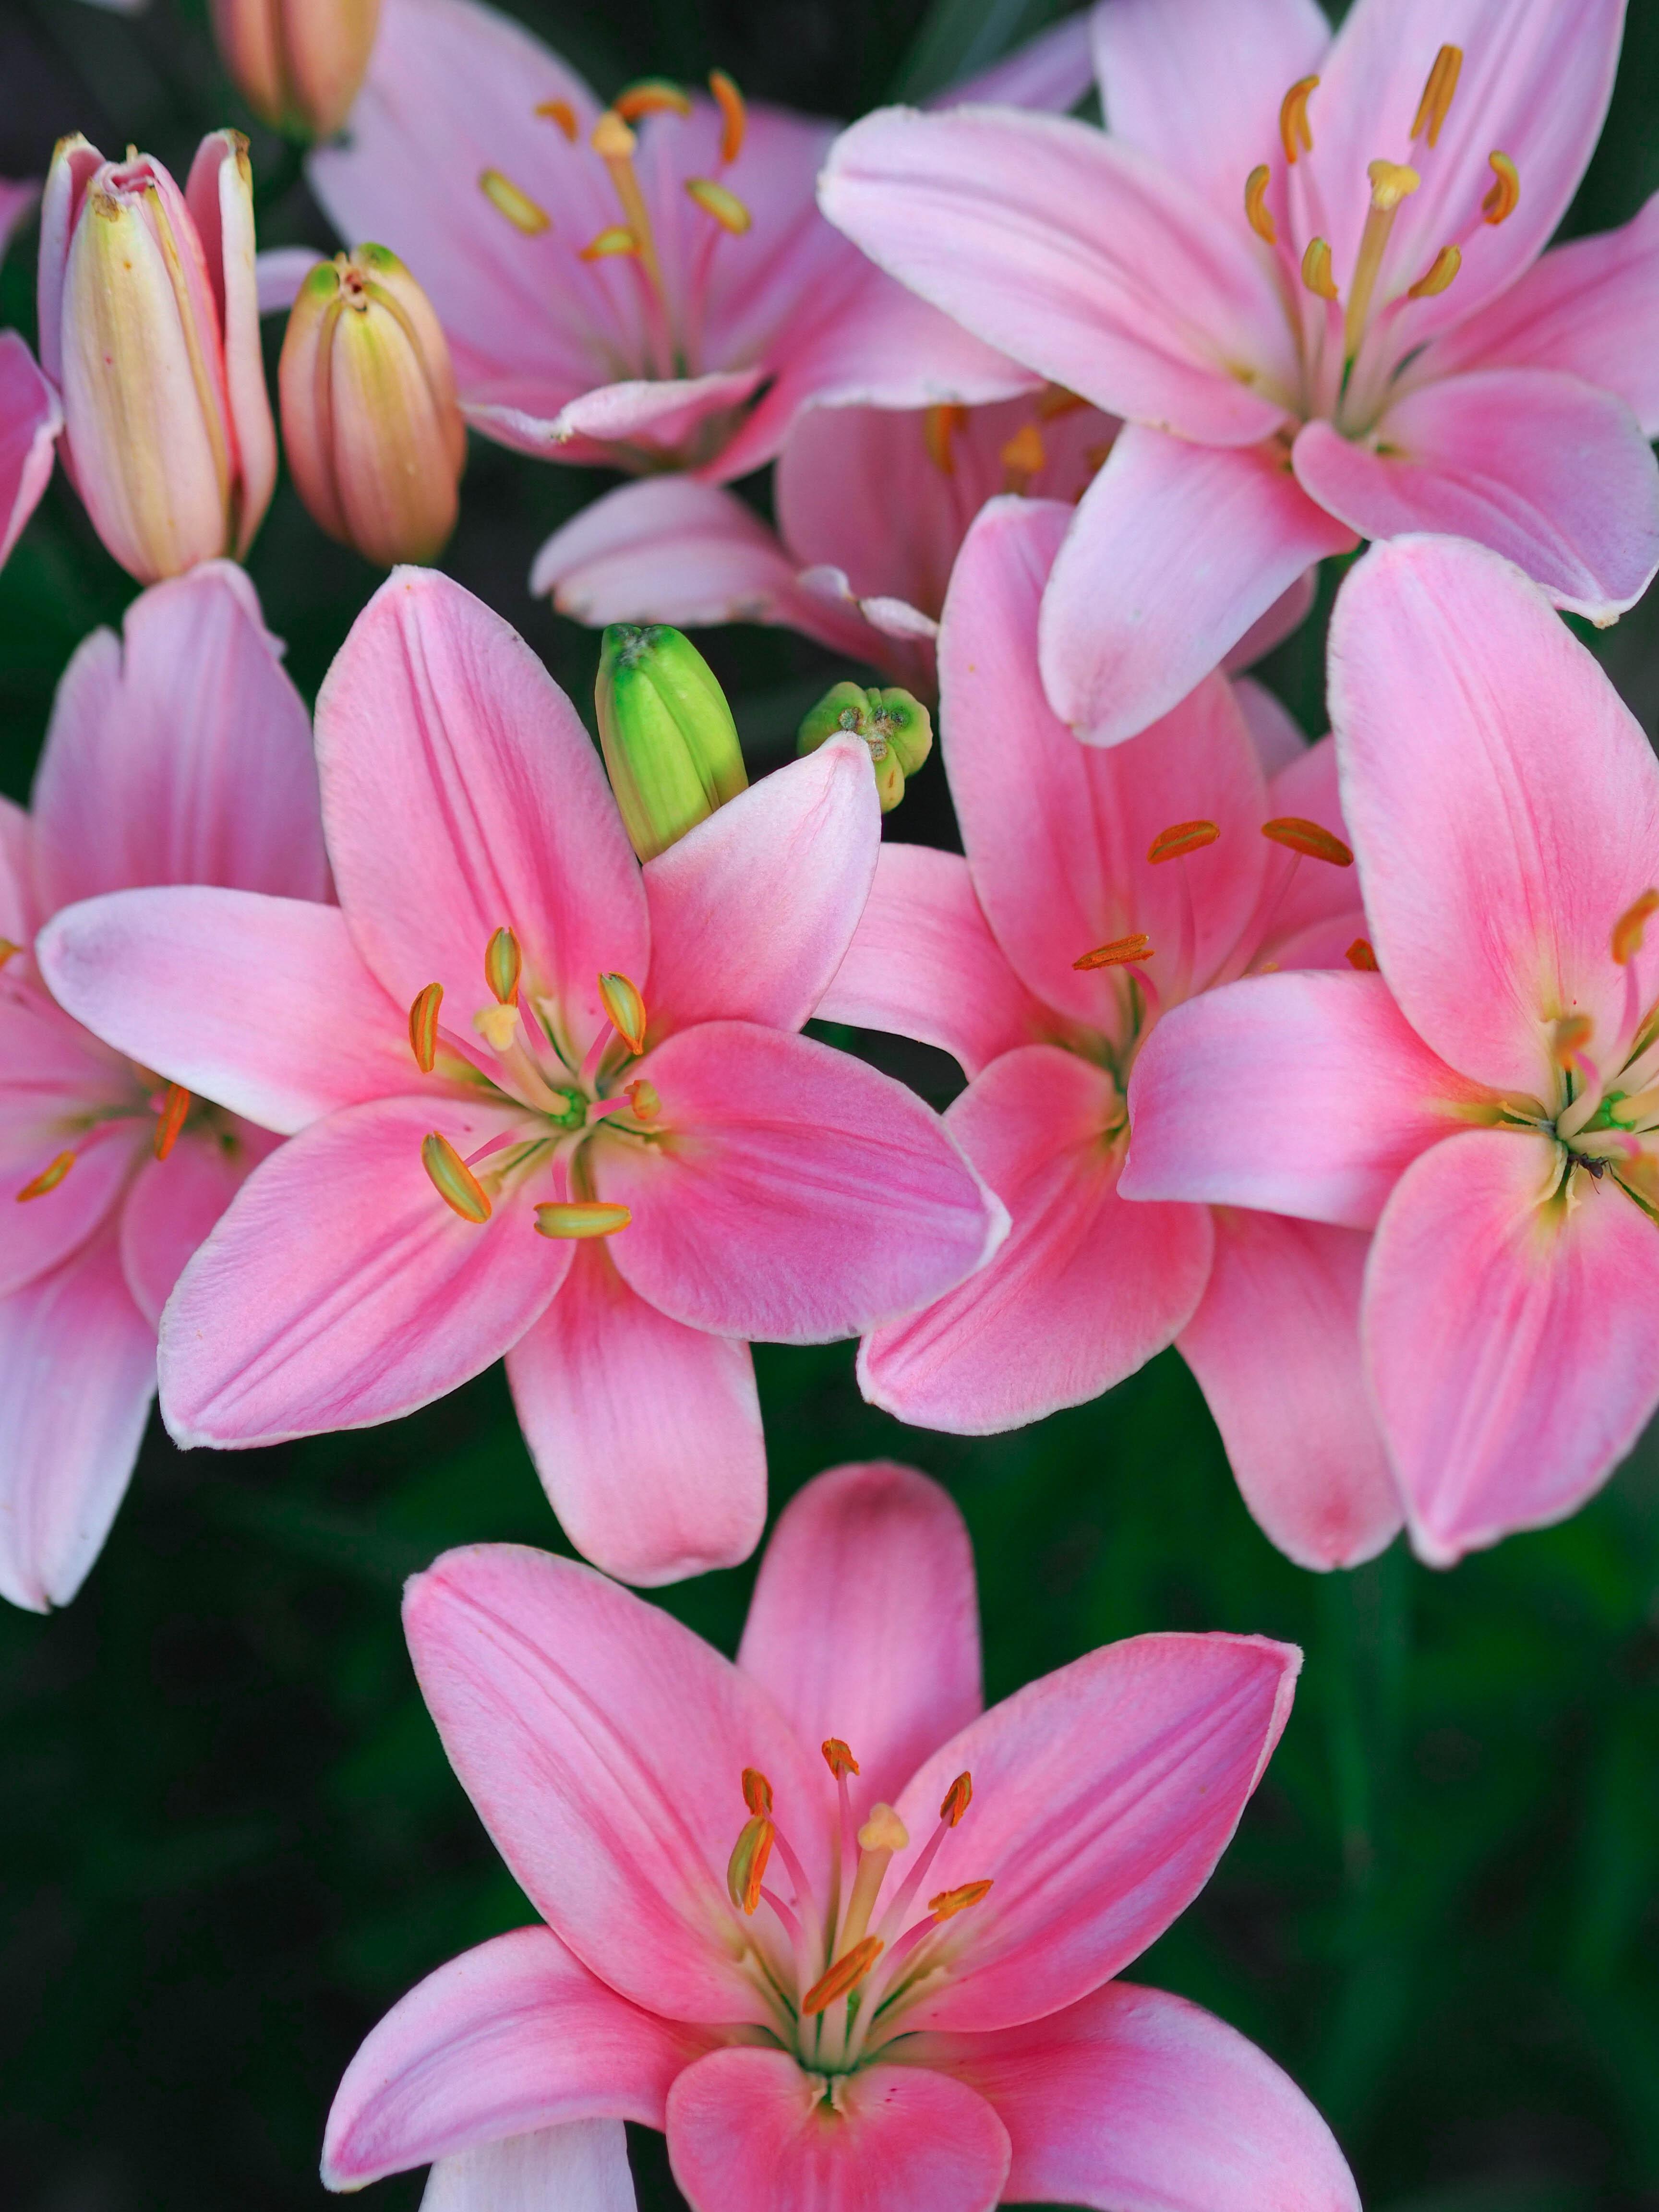 Lilies Asiatic 'Foxtrot' - Pot Lilies (Shipping begins Jan. 2021) from Leo Berbee Bulb Company